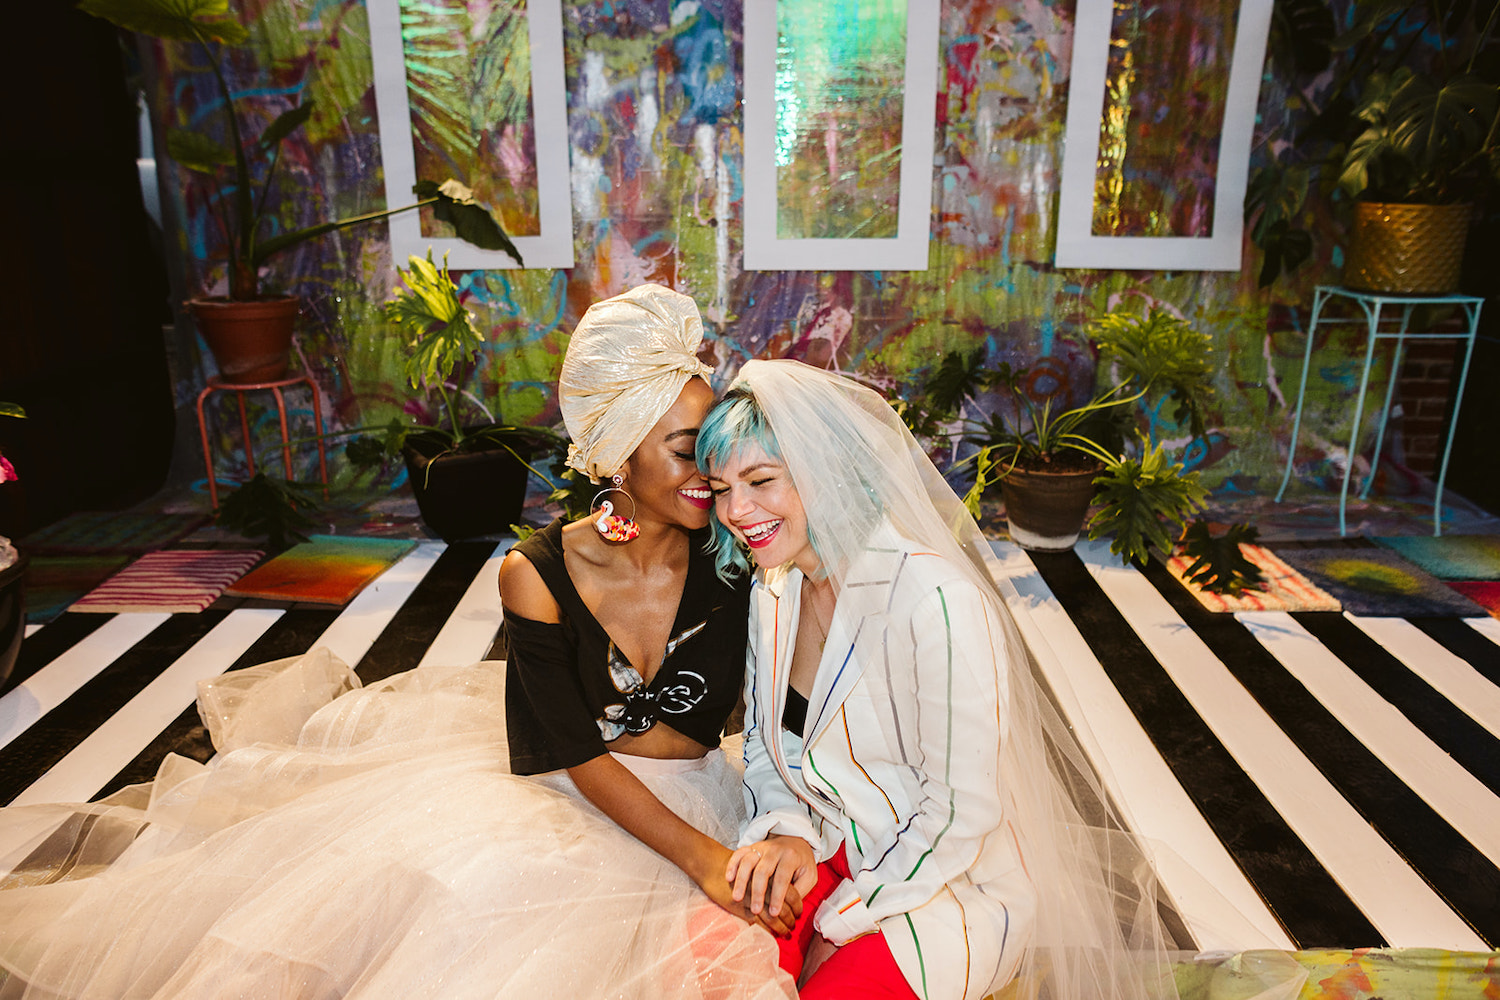 bride wearing red pants, white suit jacket and veil laughs with bride wearing full, tulle skirt, black crop top, and turban